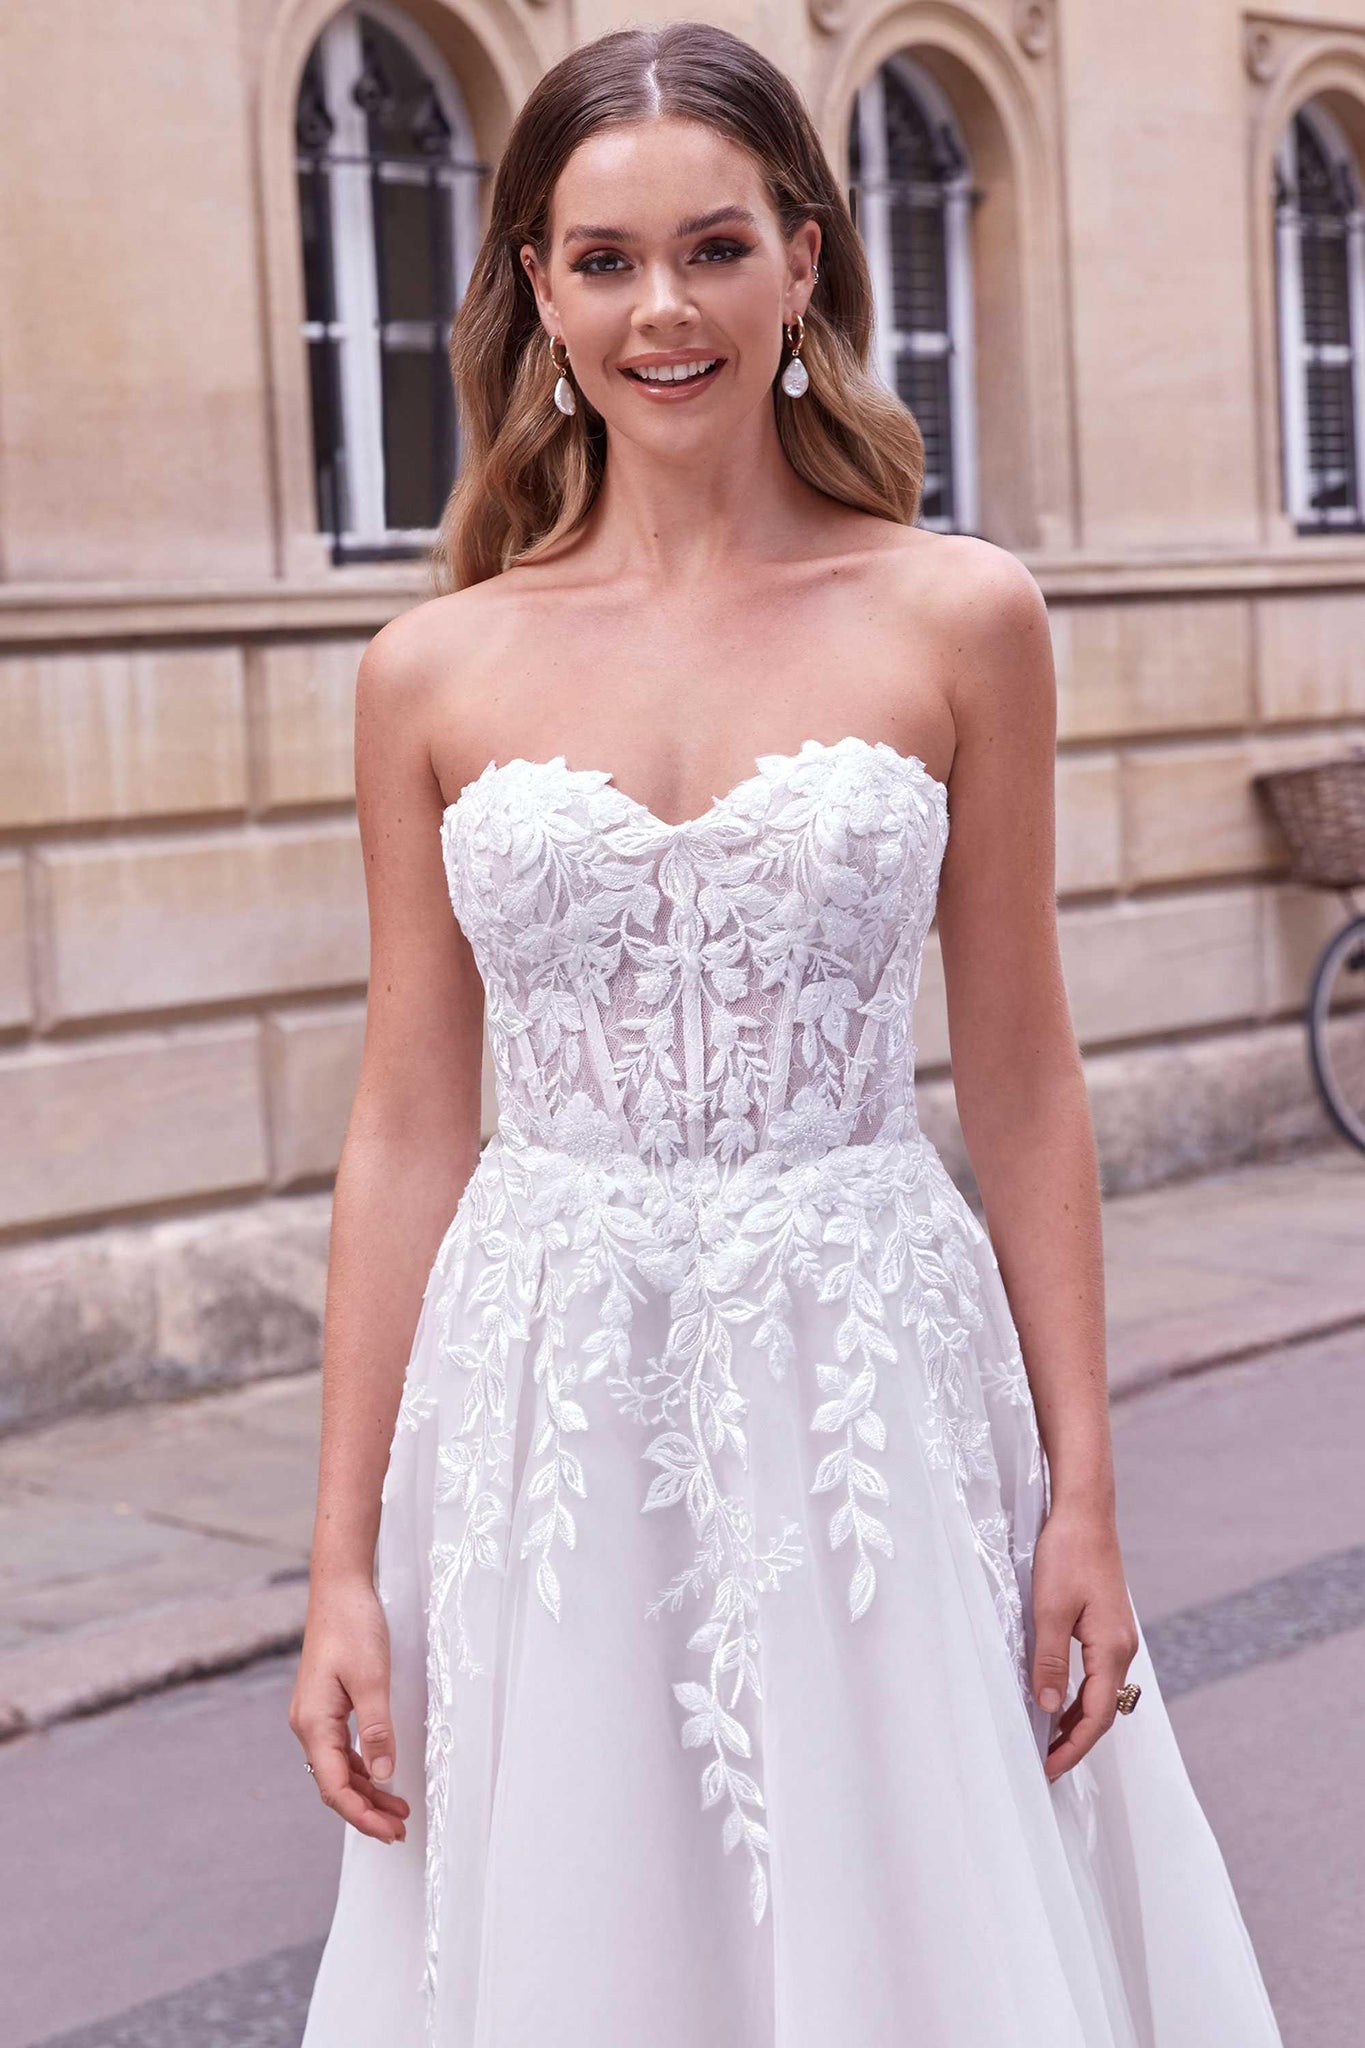 UK20 Allegra - Adore Bridal and Occasion Wear